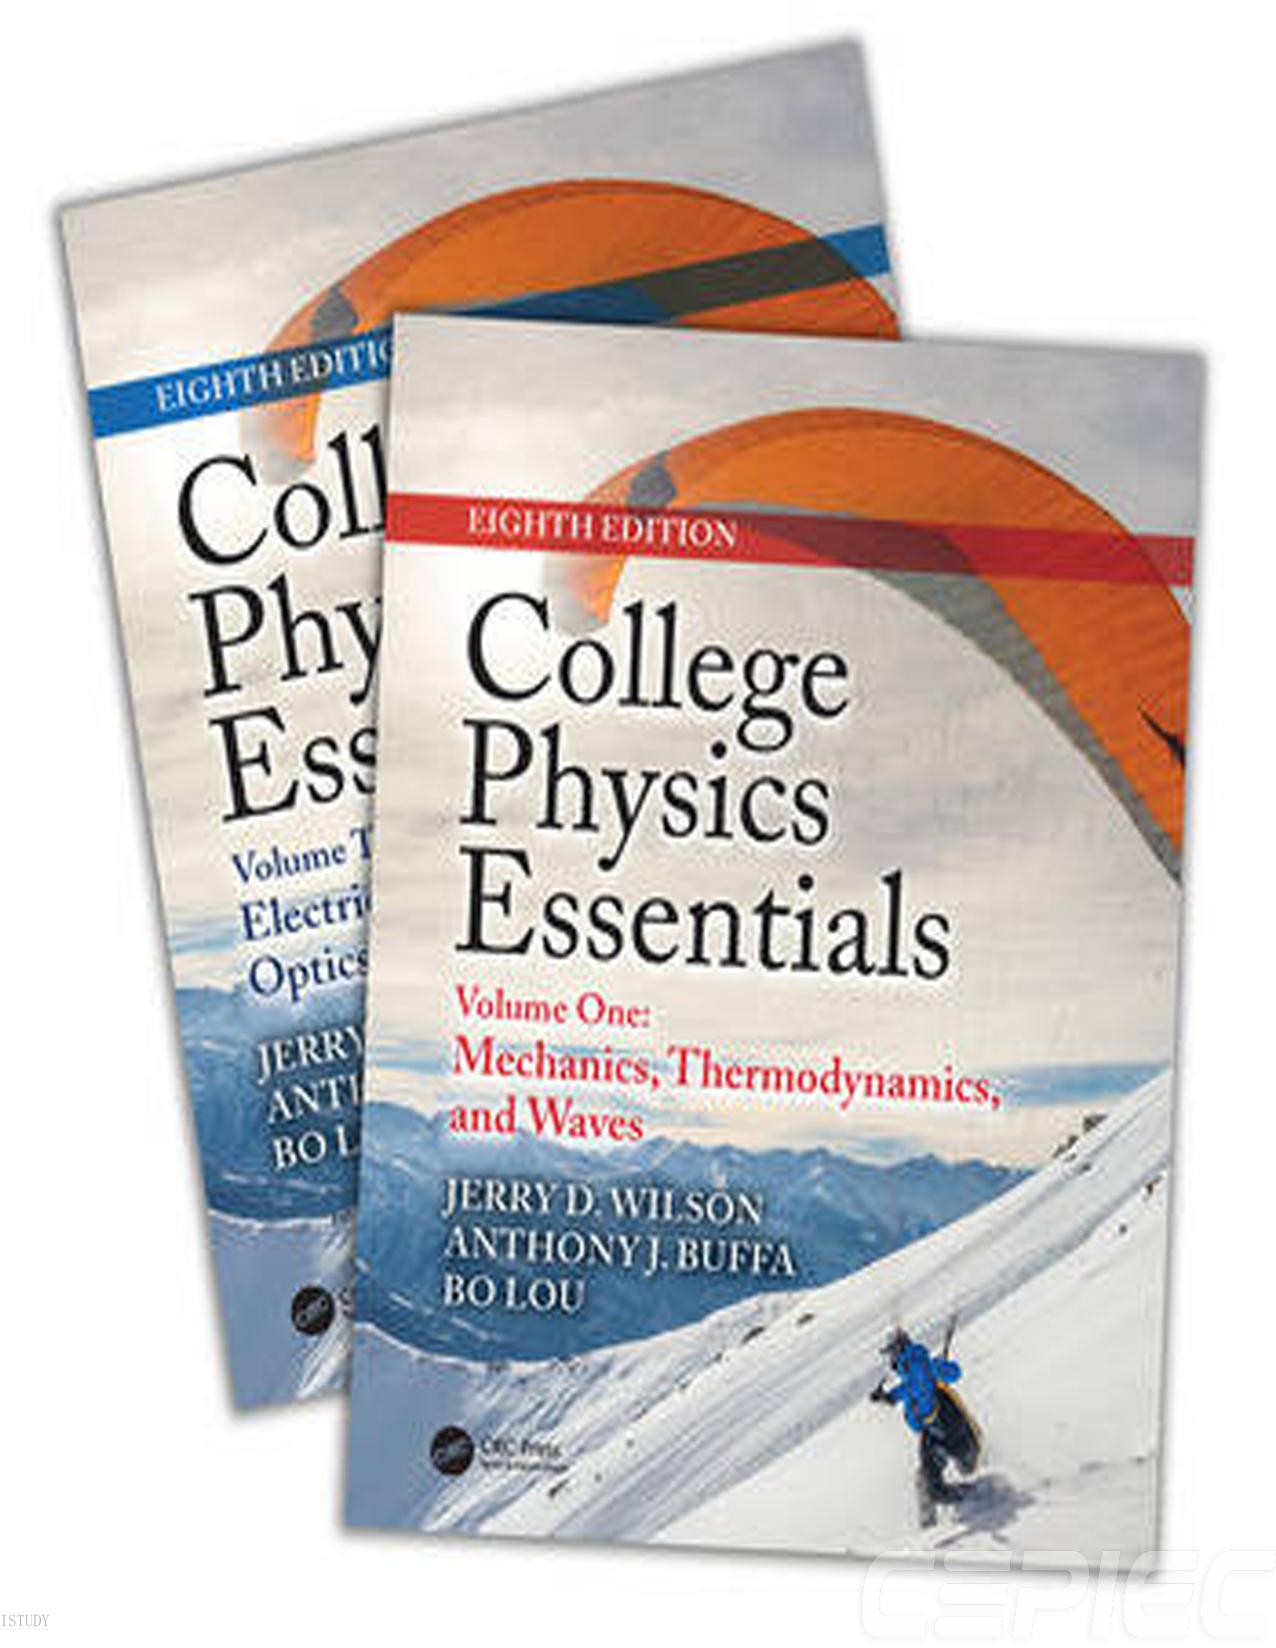 College Physics Essentials, (Two-Volume Set) by Jerry D. Wilson Anthony J. Buffa Bo Lou